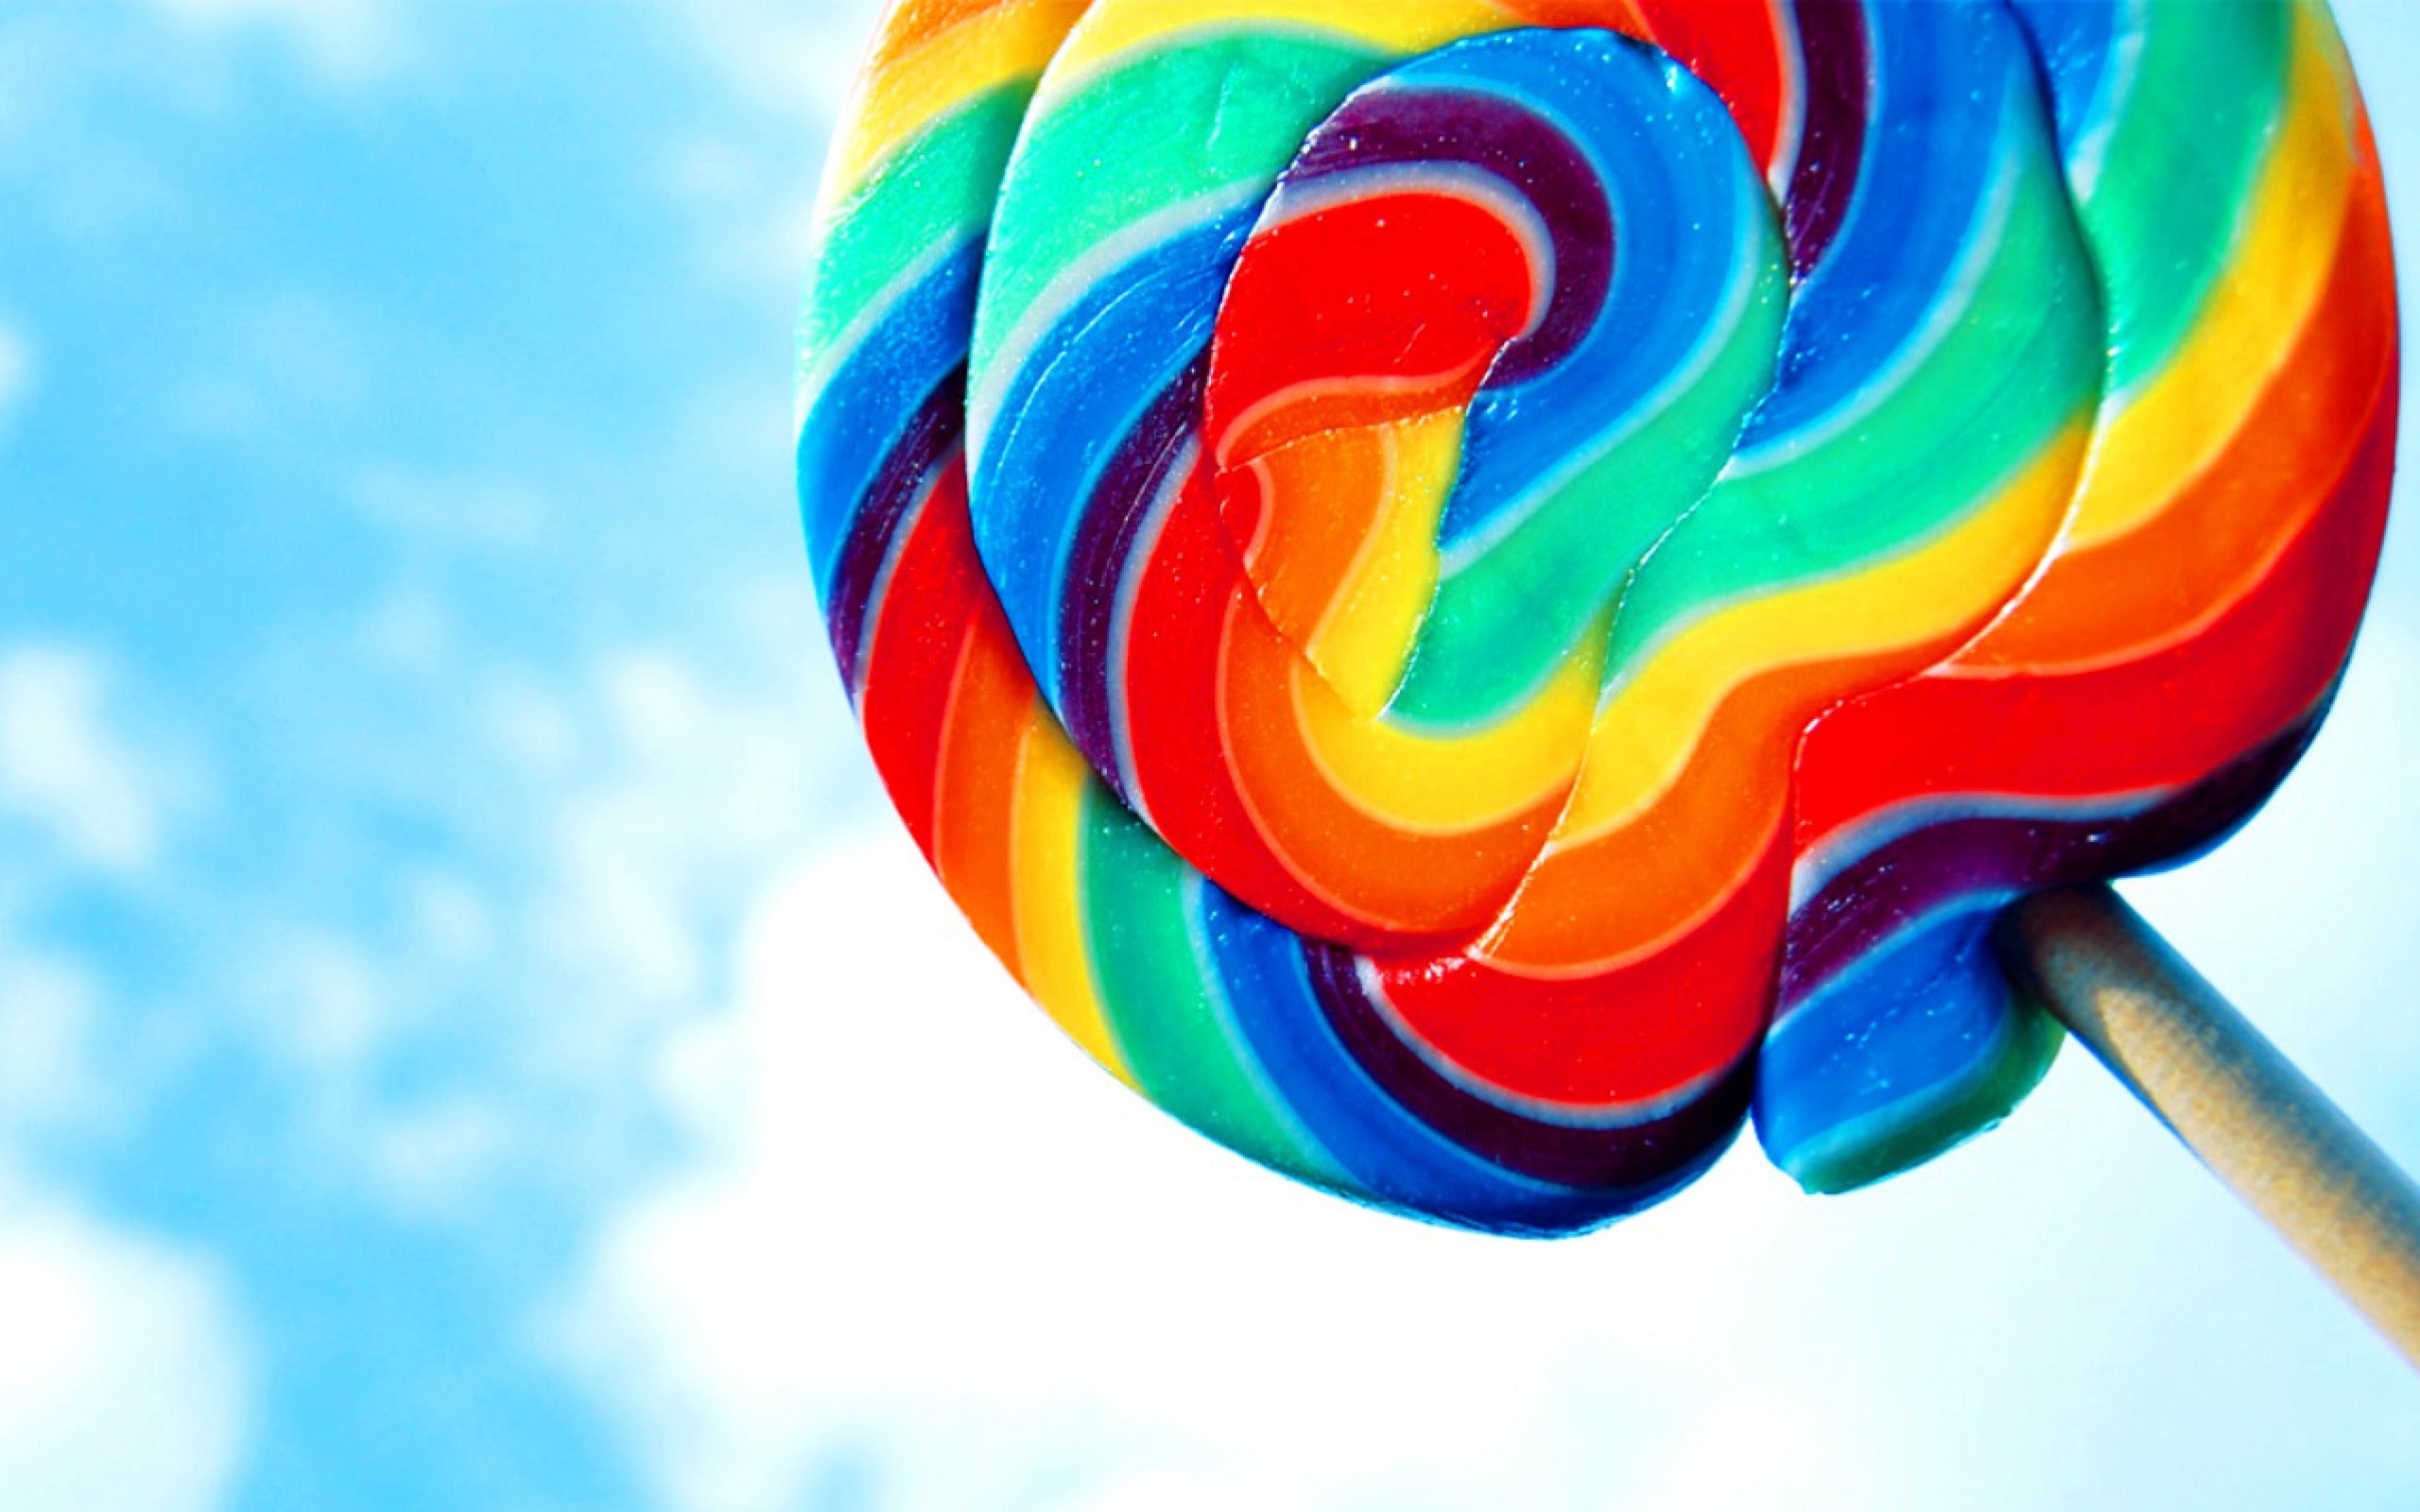 Weekly Wallpaper Celebrate Android L With These Lollipop Wallpapers Lifehacker Australia